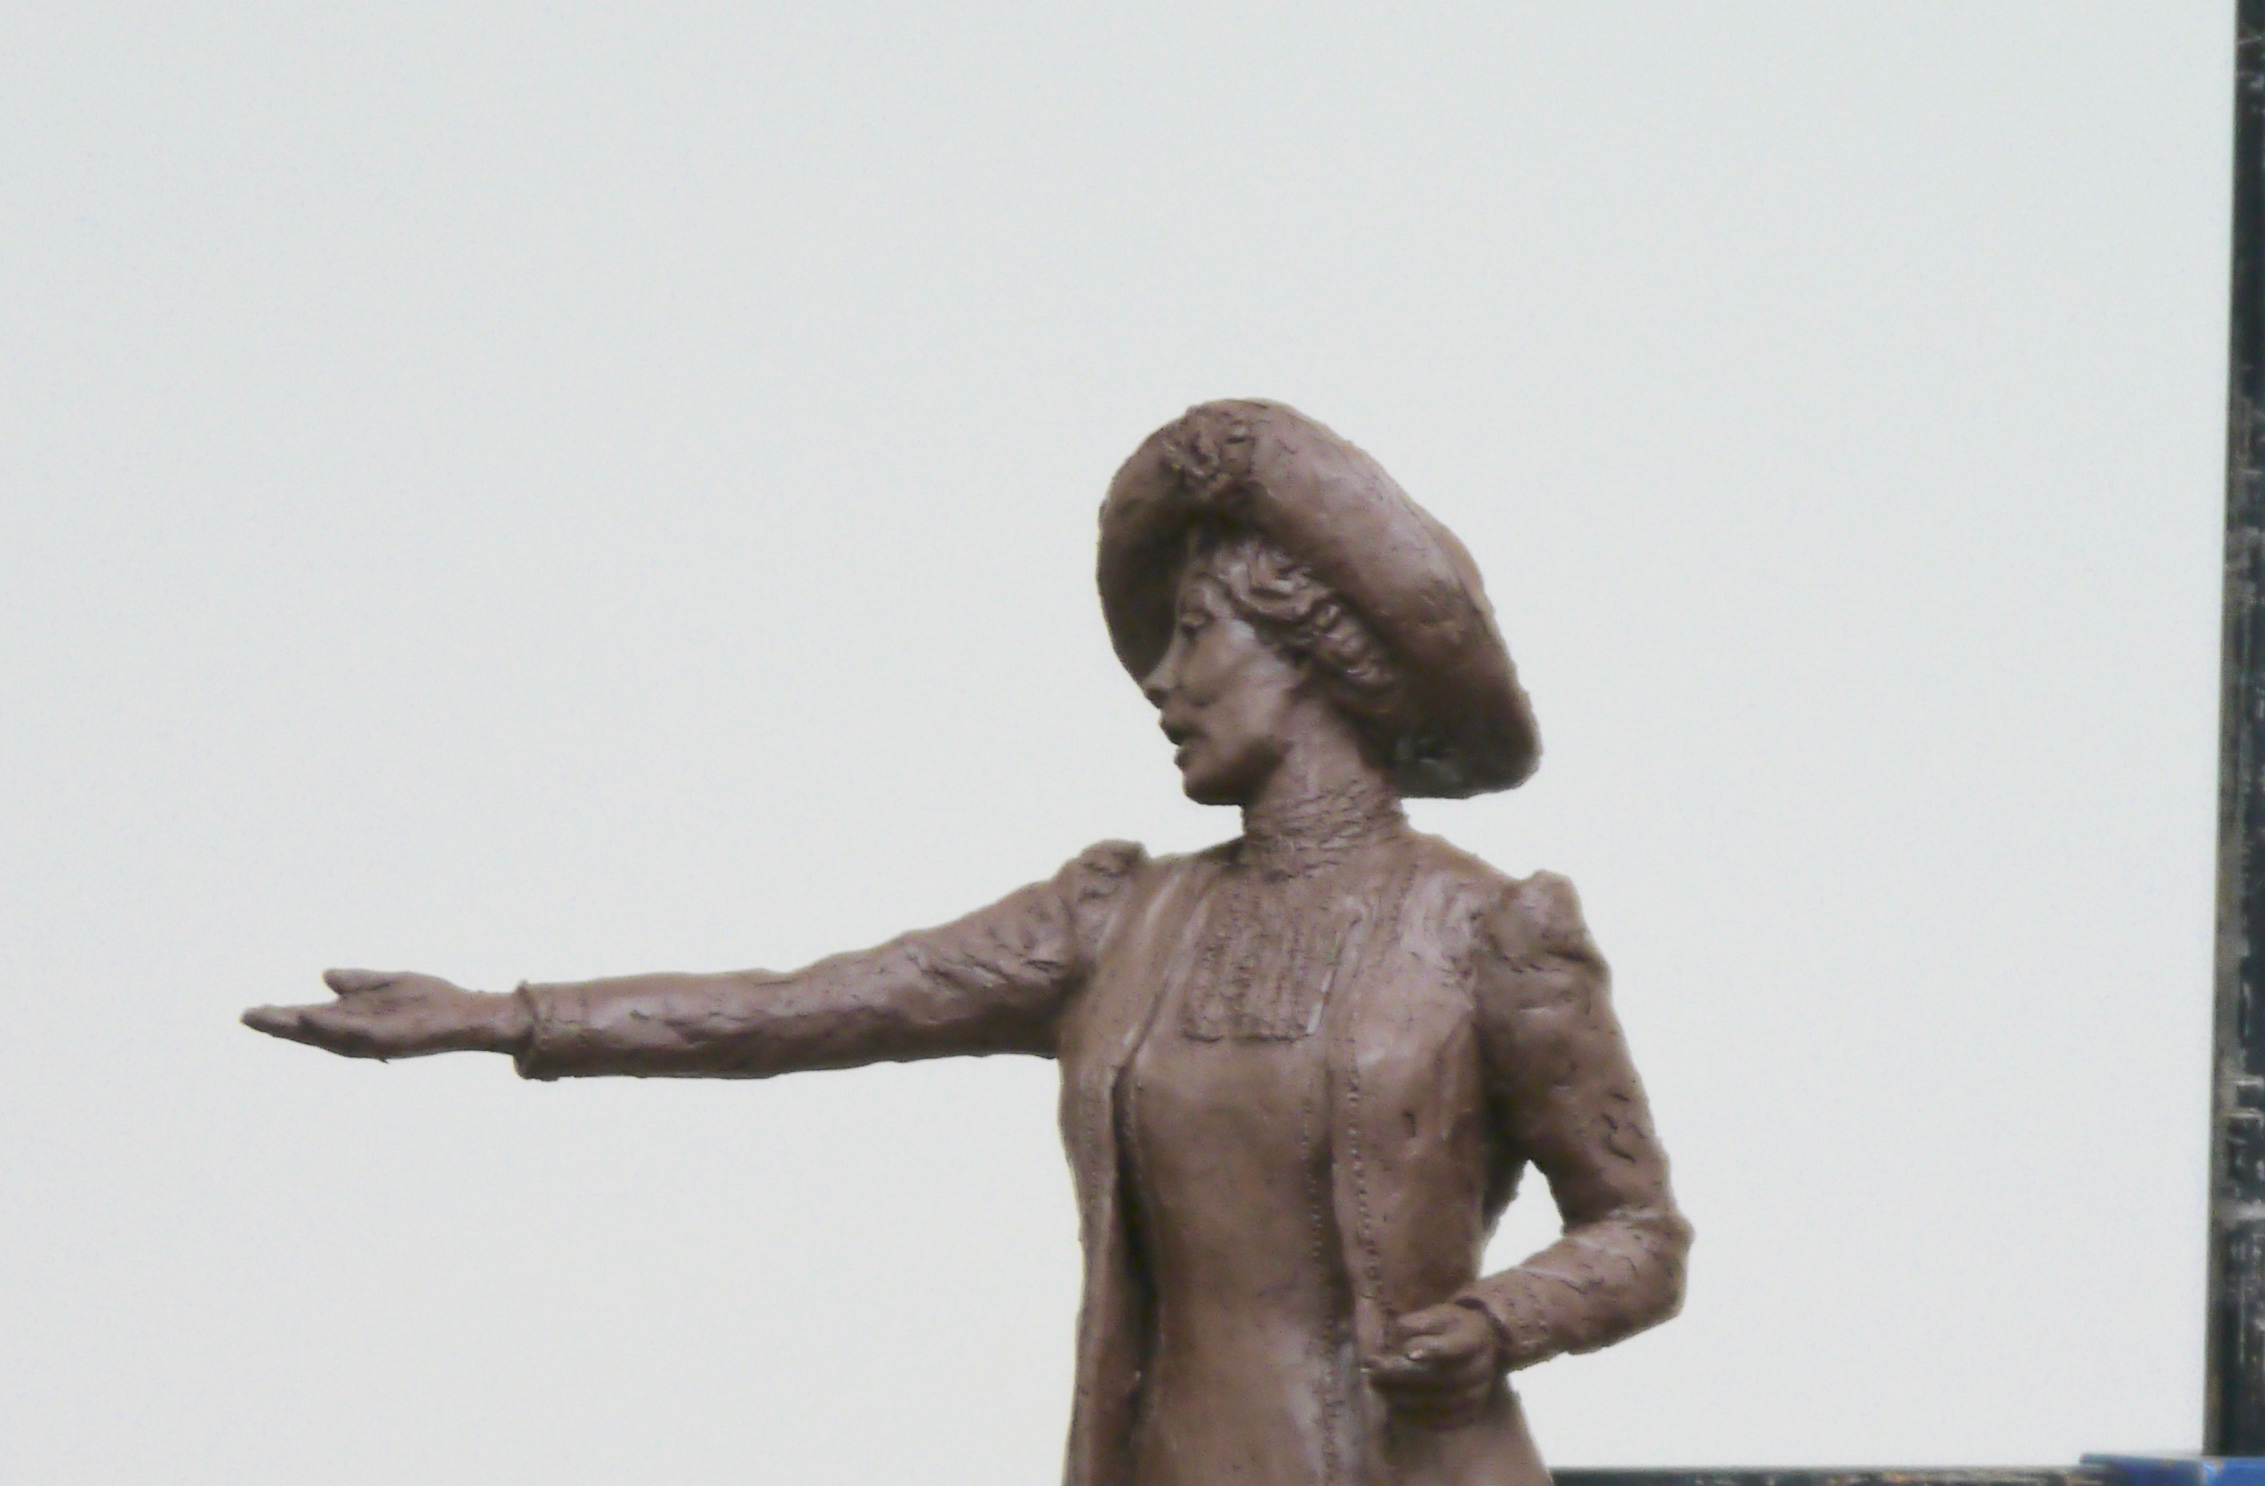 The Pankhurst maquette: the pose